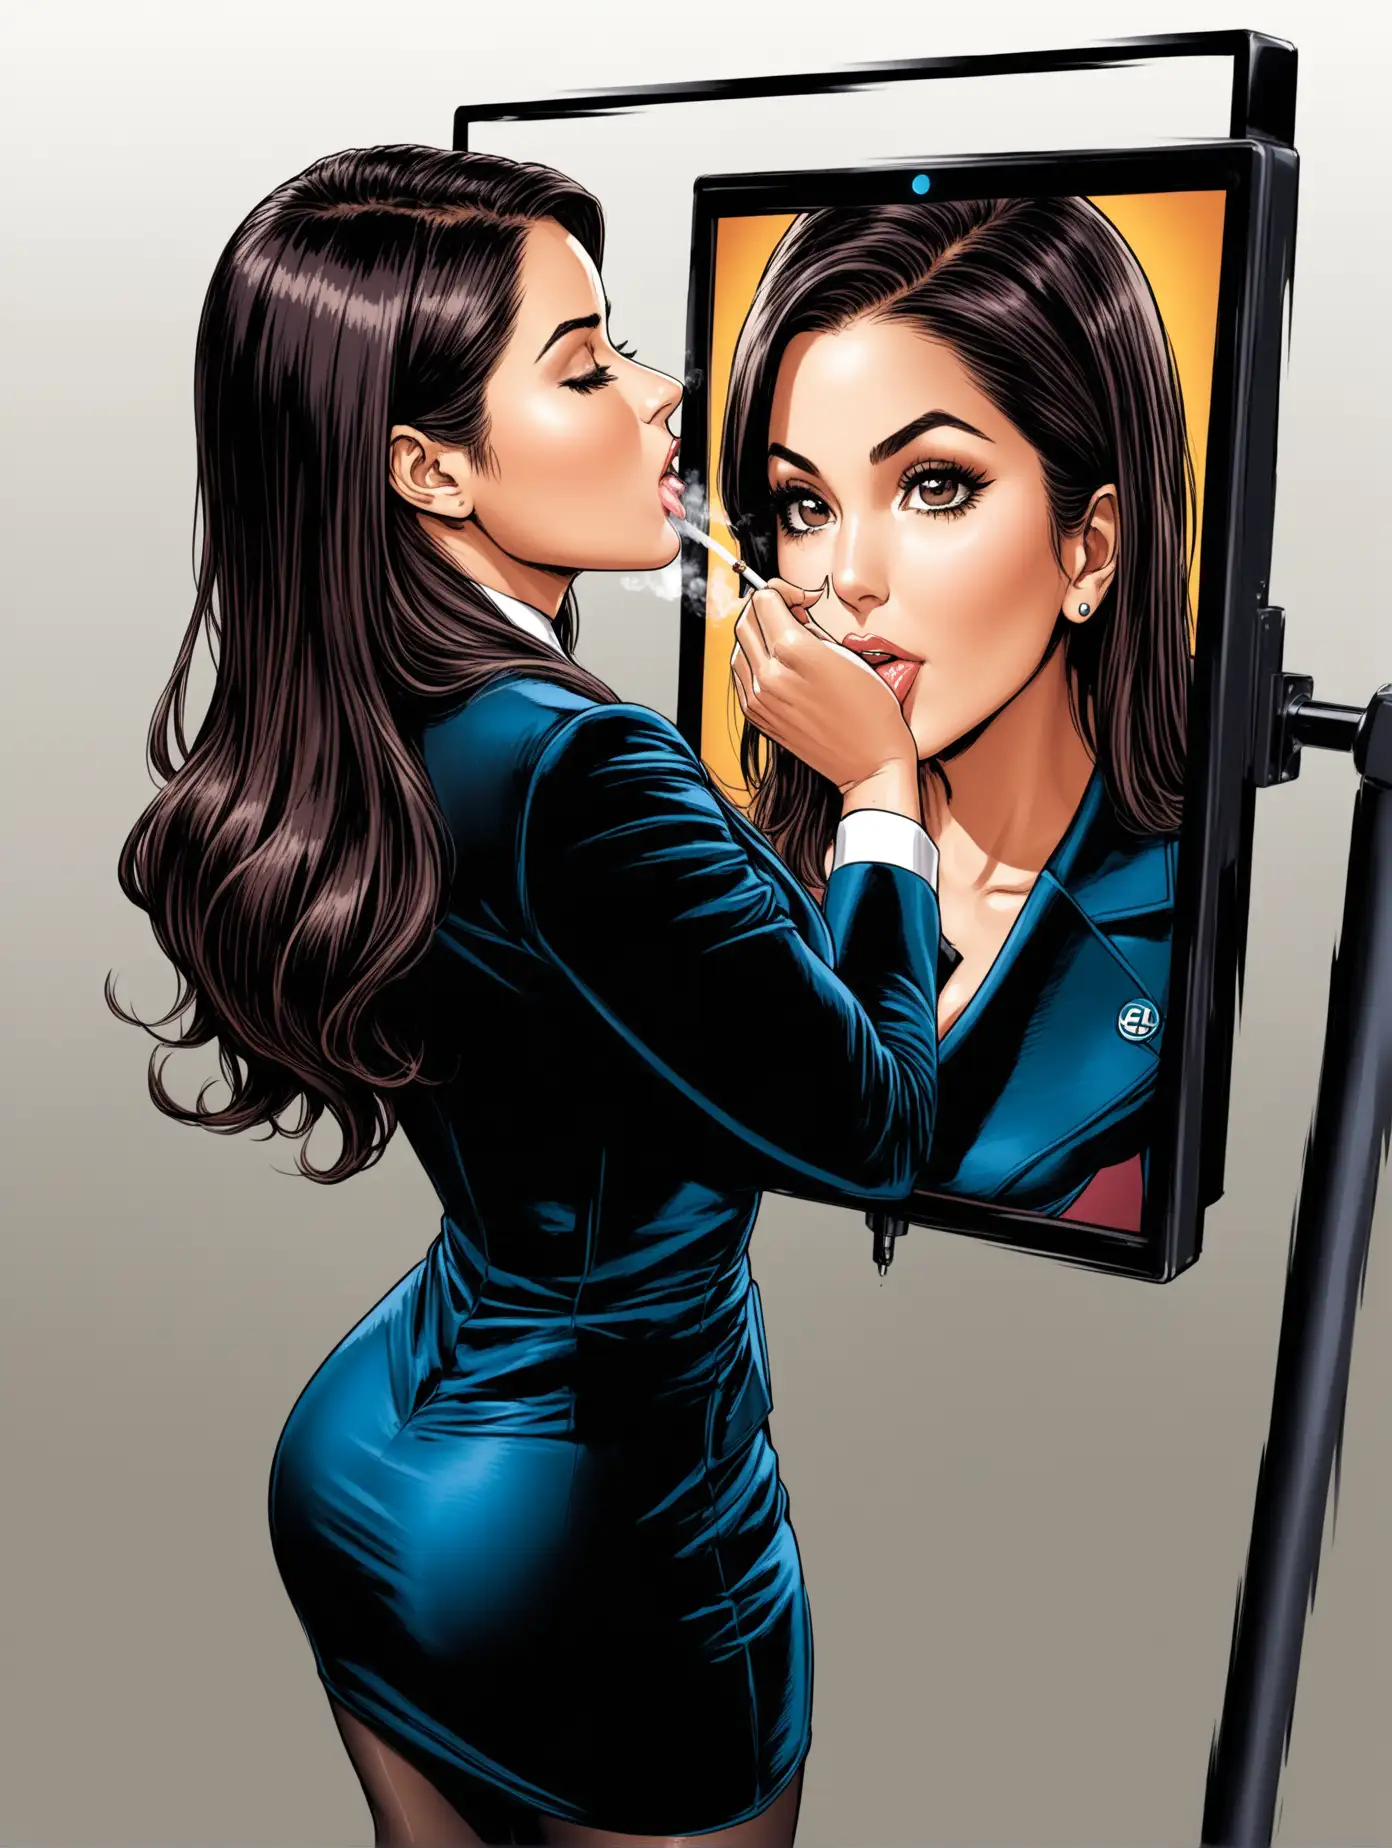 Rudabeh Shahbazi KCAL News Anchor in Realistic DC Comic Art Style